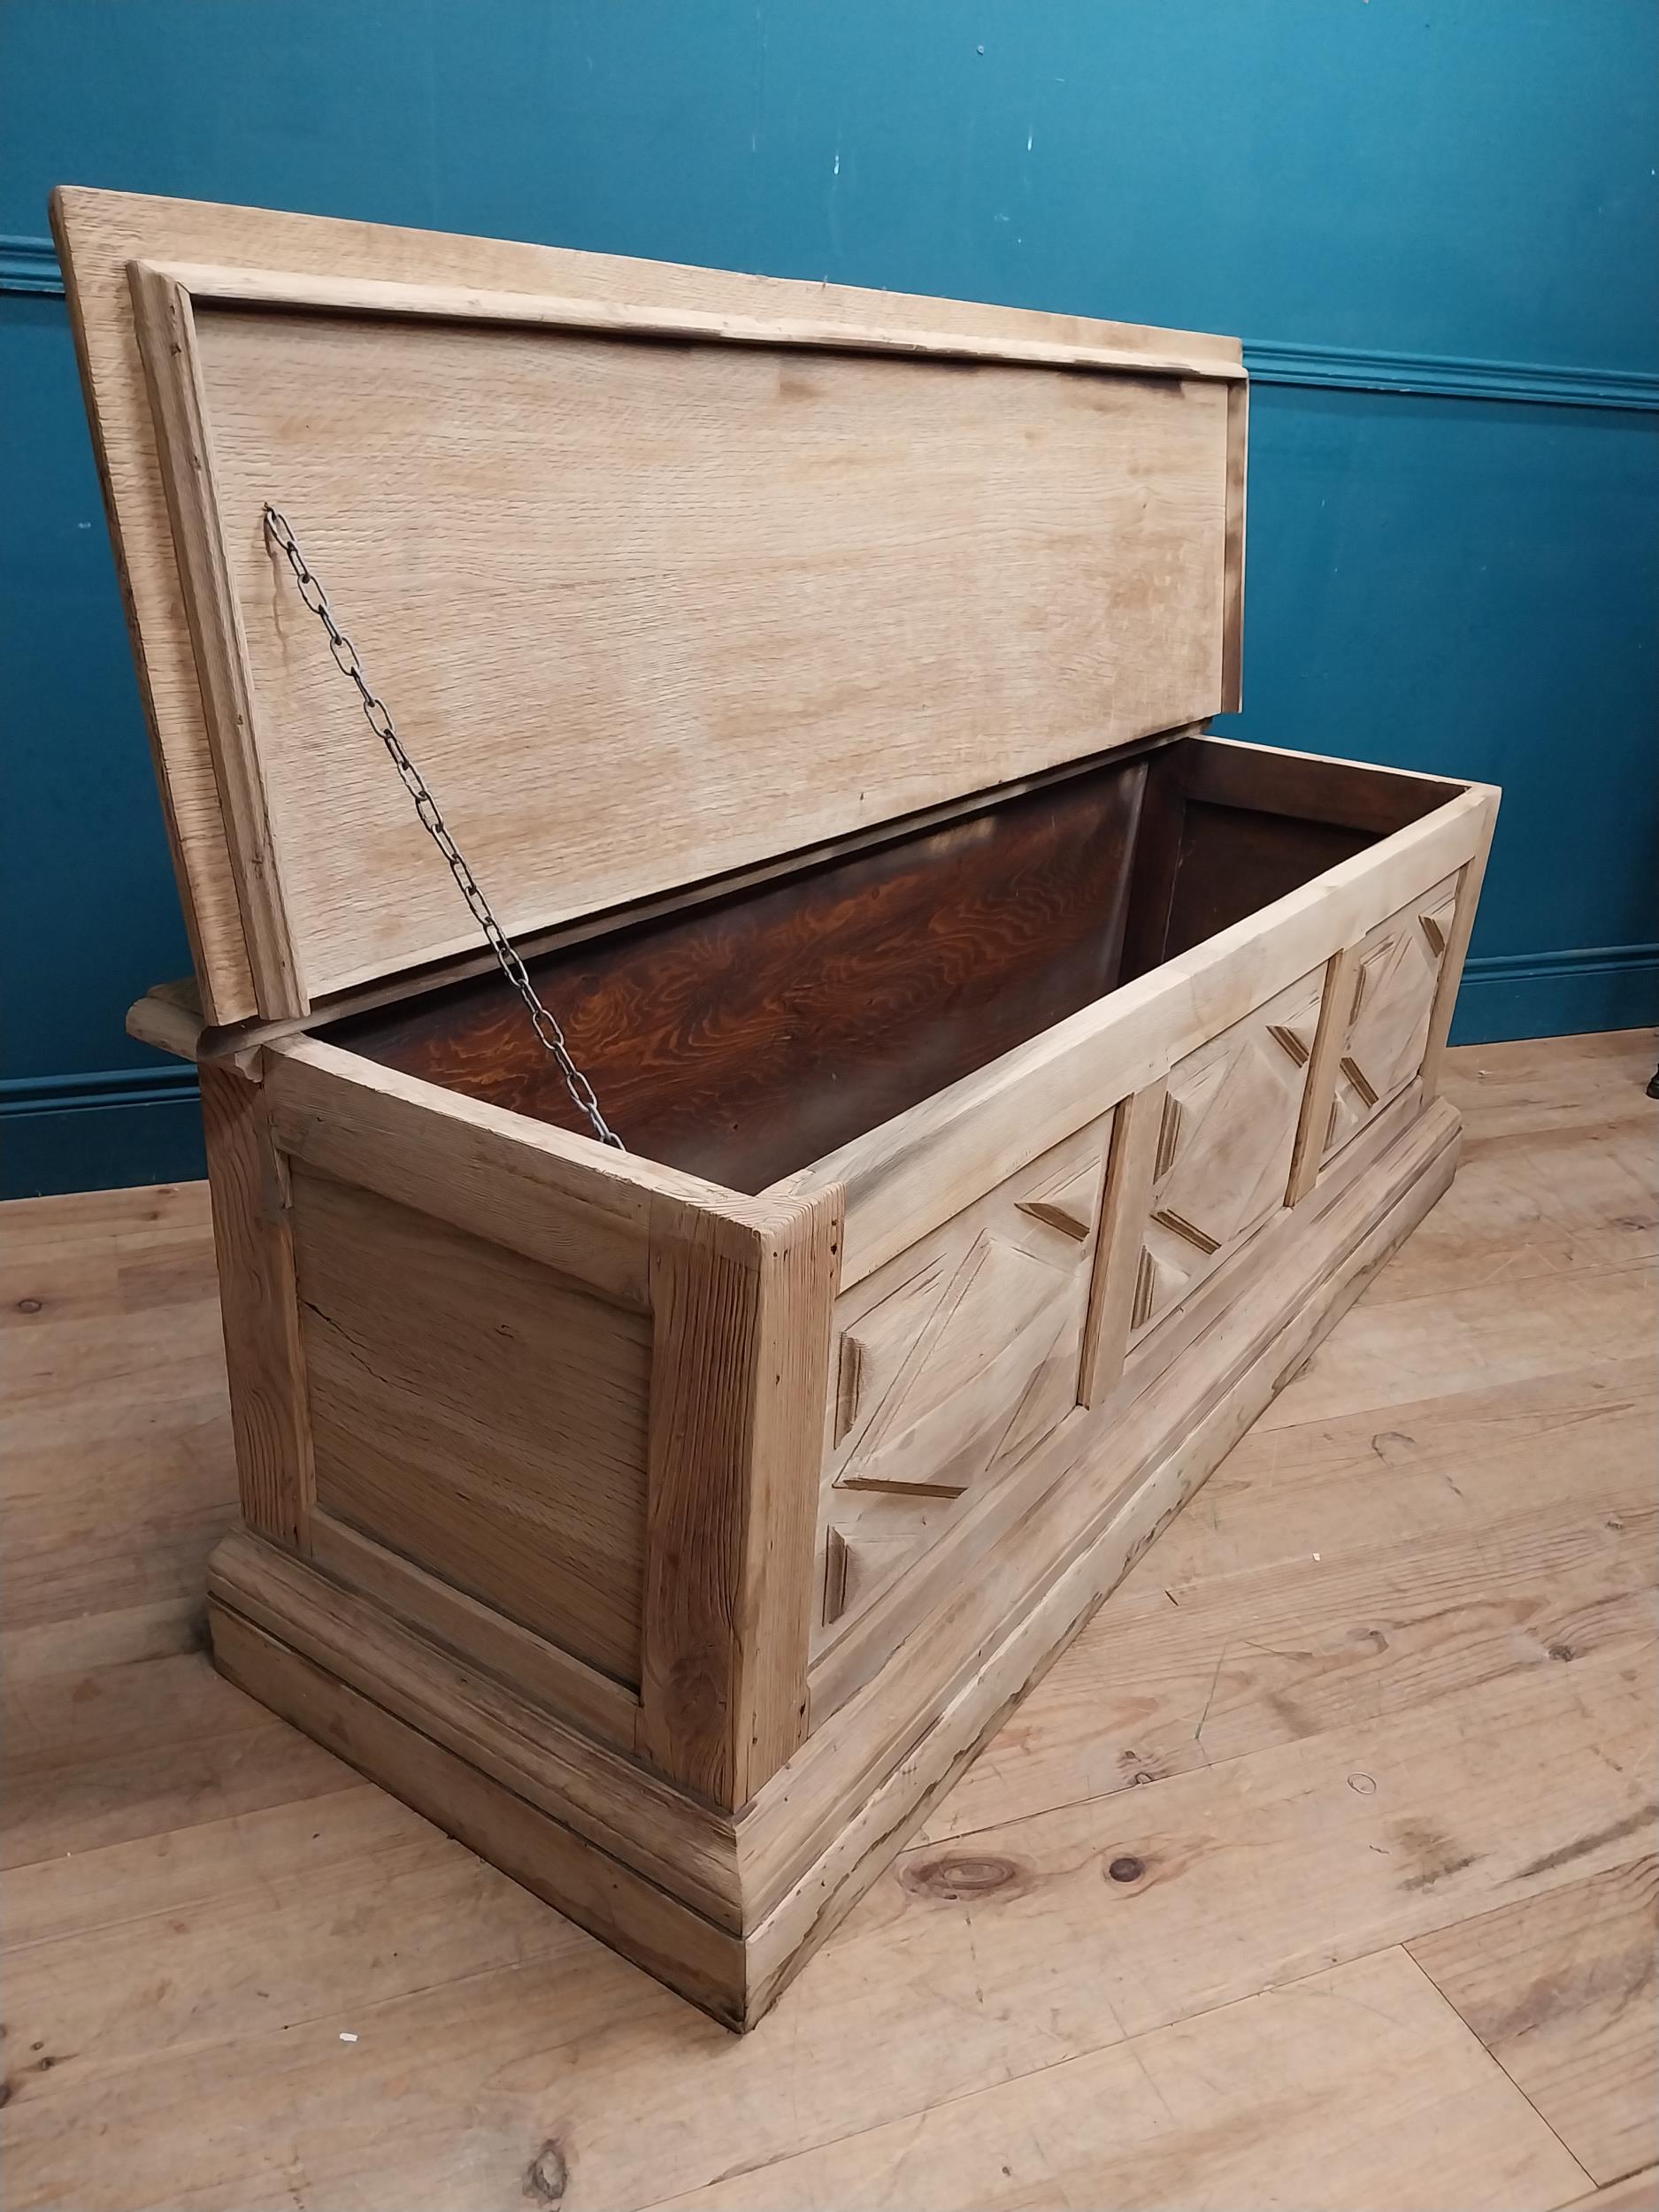 Early 20th C. bleached oak blanket box with metal mounts. {57 cm H x 162 cm W x 52 cm D}. - Image 5 of 6